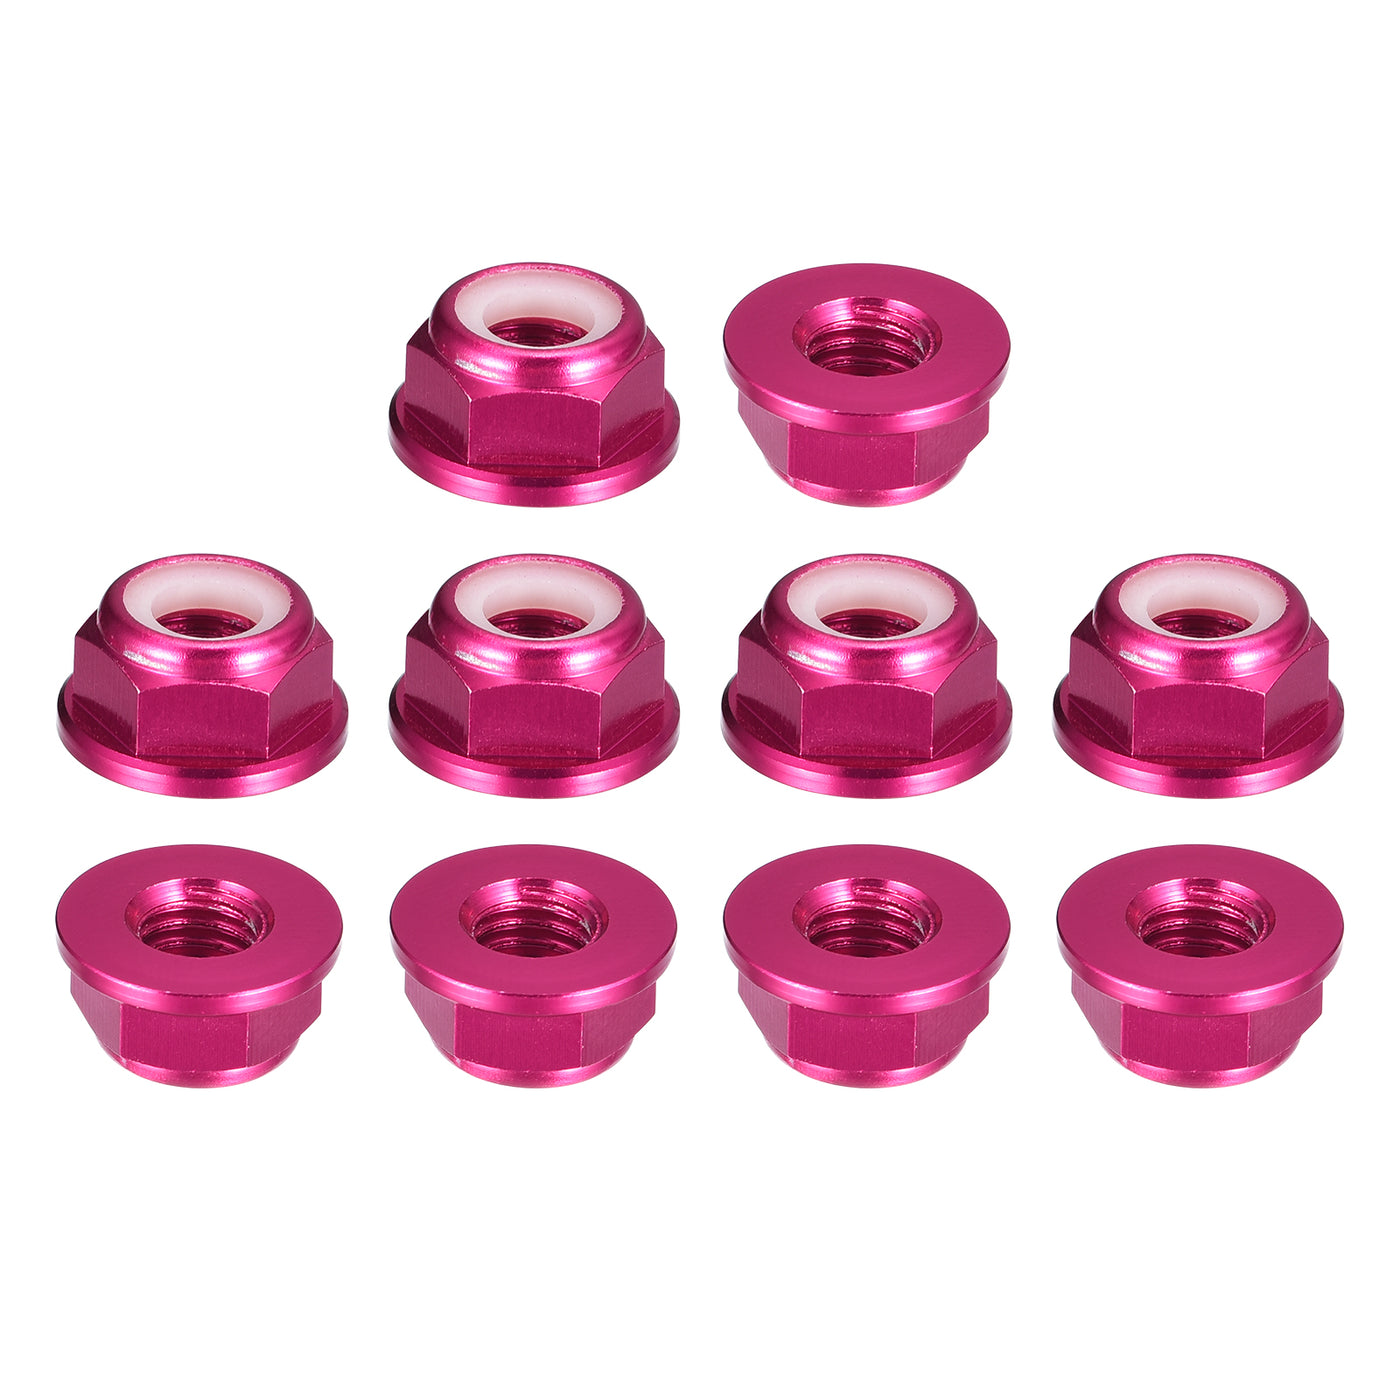 uxcell Uxcell Nylon Insert Hex Lock Nuts, 10pcs - M6 x 1mm Aluminum Alloy Self-Locking Nut, Anodizing Flange Lock Nut for Fasteners (Pink)